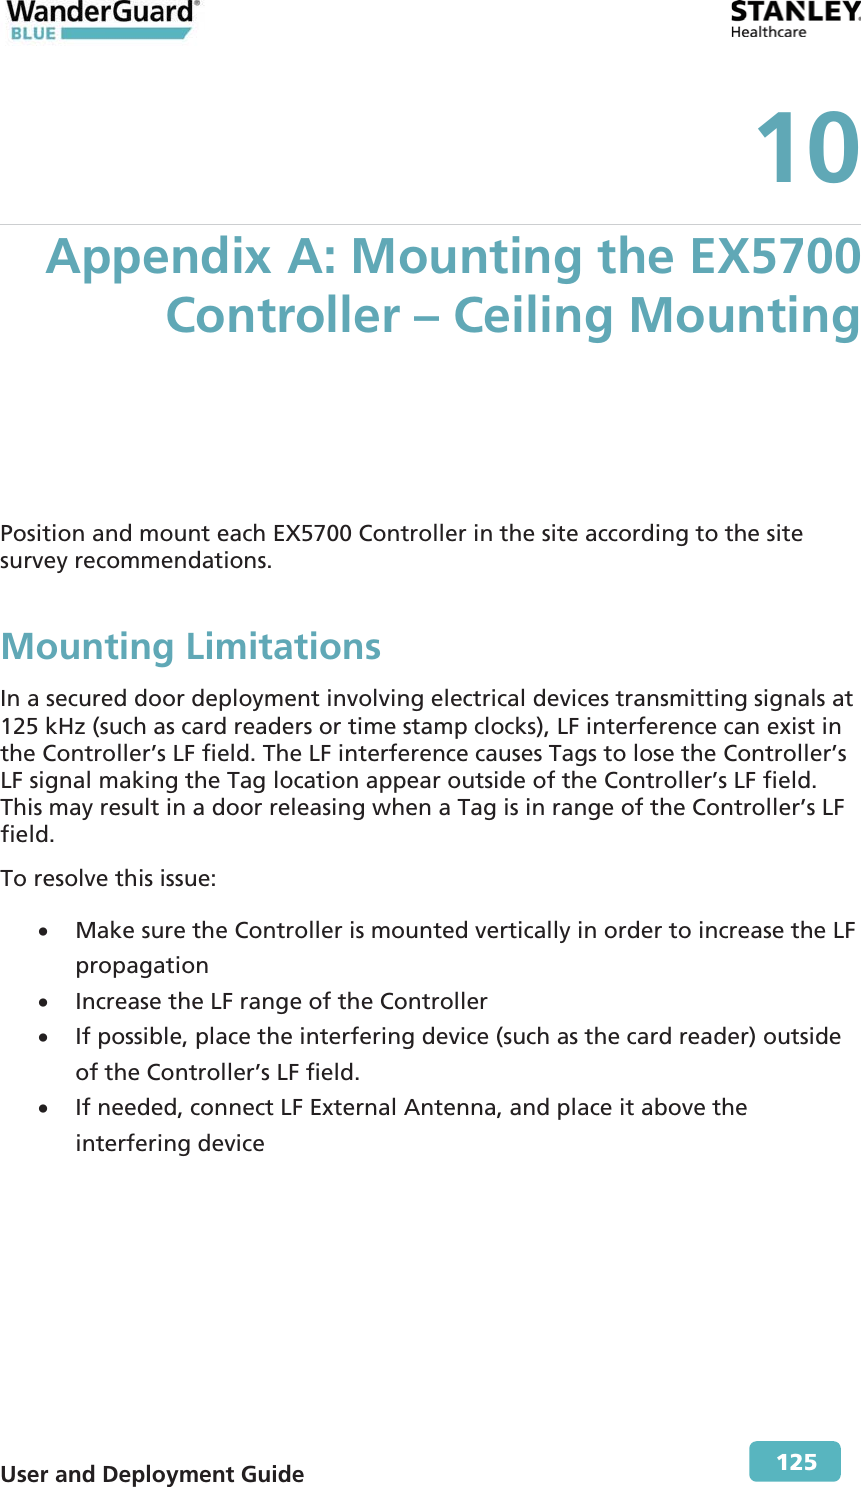  User and Deployment Guide        125 10 Appendix A: Mounting the EX5700 Controller – Ceiling Mounting  Position and mount each EX5700 Controller in the site according to the site survey recommendations. Mounting Limitations In a secured door deployment involving electrical devices transmitting signals at 125 kHz (such as card readers or time stamp clocks), LF interference can exist in the Controller’s LF field. The LF interference causes Tags to lose the Controller’s LF signal making the Tag location appear outside of the Controller’s LF field. This may result in a door releasing when a Tag is in range of the Controller’s LF field. To resolve this issue: x Make sure the Controller is mounted vertically in order to increase the LF propagation x Increase the LF range of the Controller  x If possible, place the interfering device (such as the card reader) outside of the Controller’s LF field. x If needed, connect LF External Antenna, and place it above the interfering device 